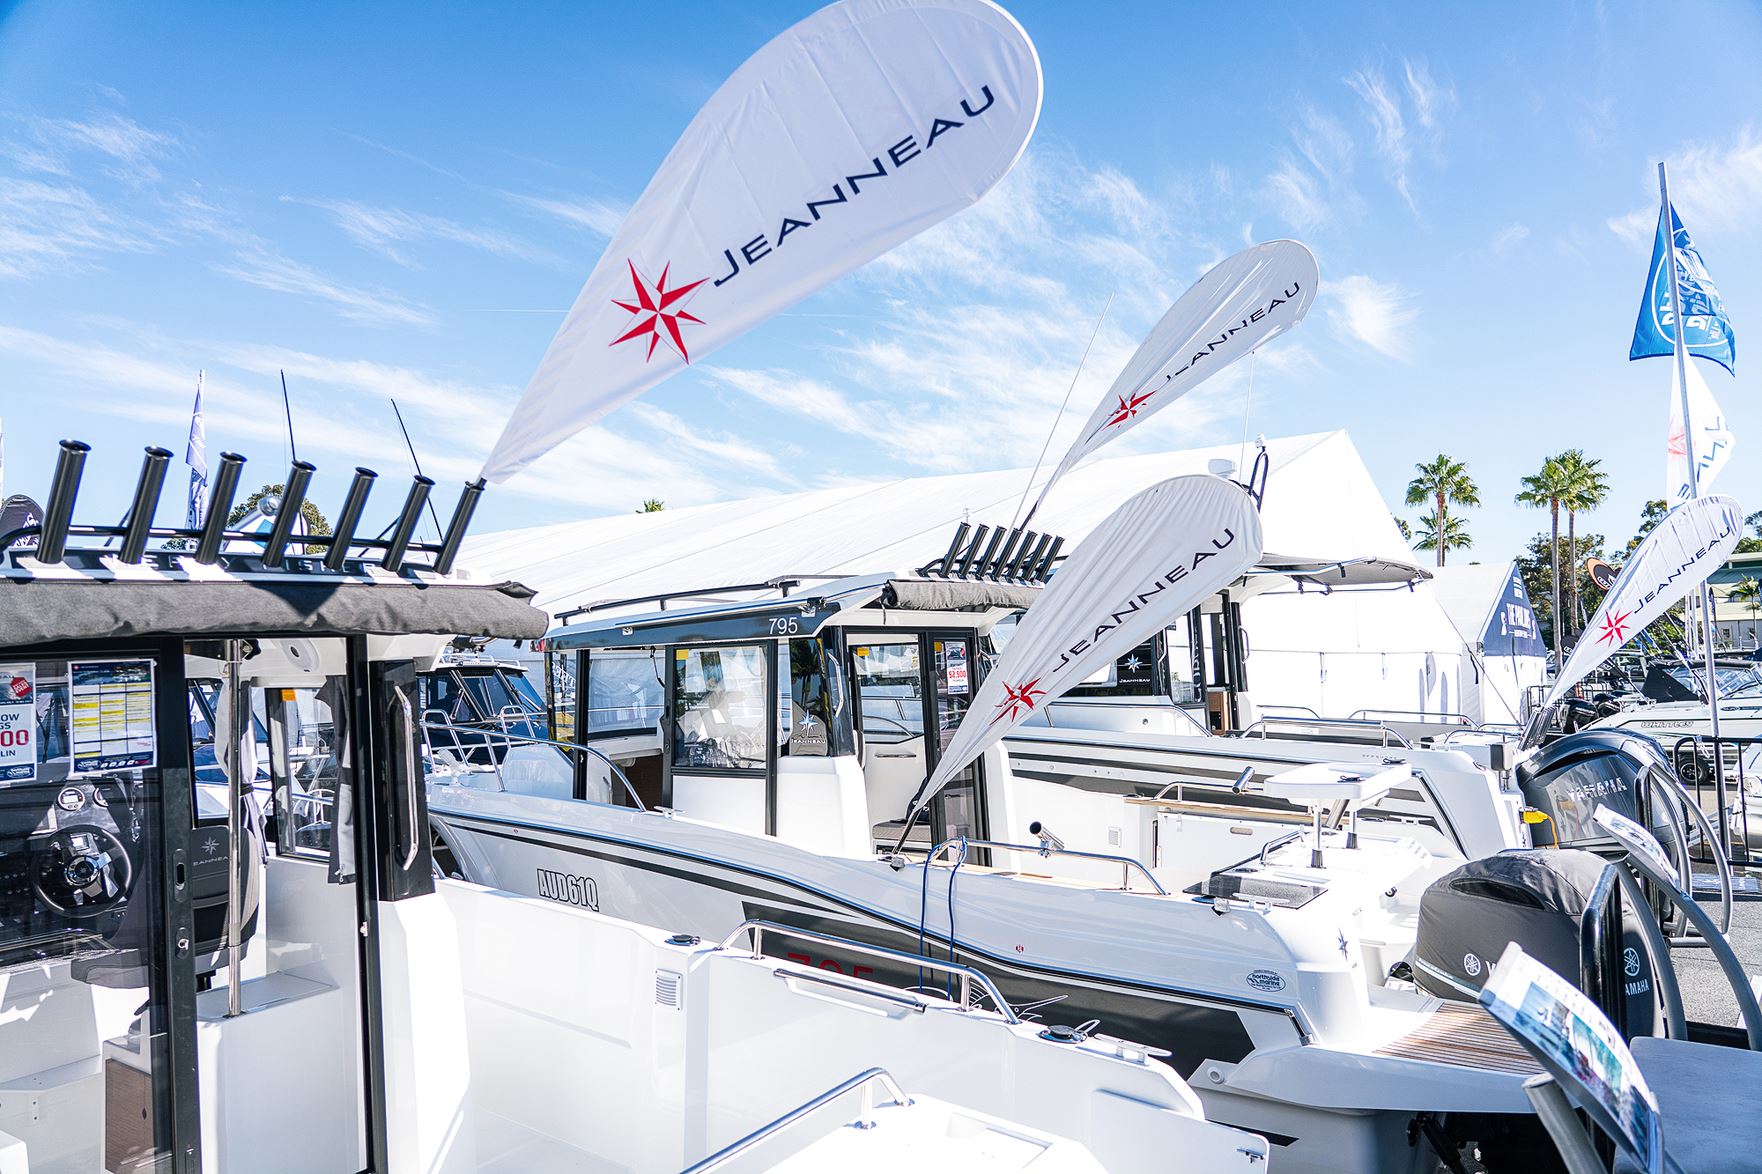 Vessels on display at Sanctuary Cove International Boat Show